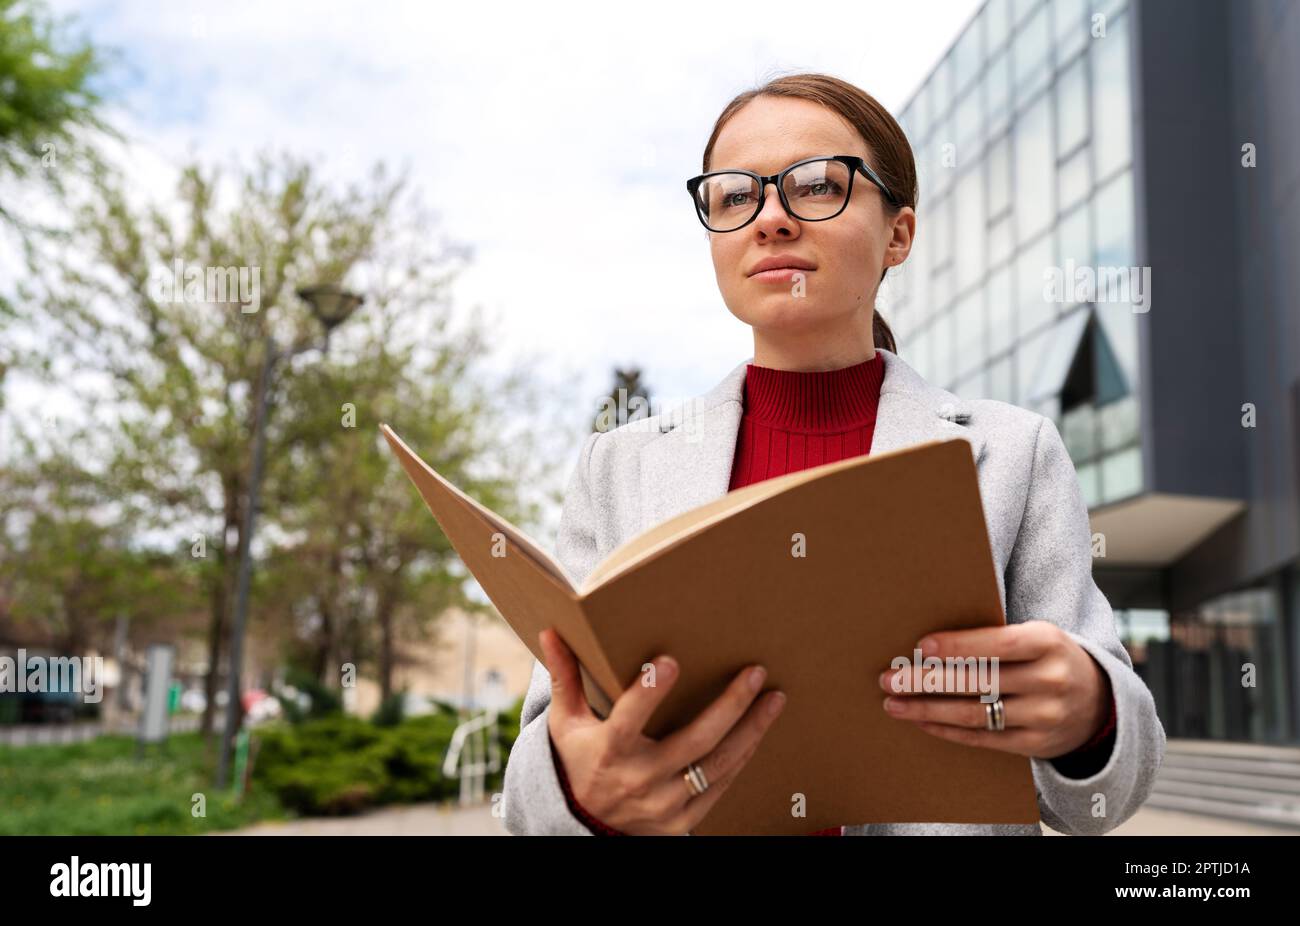 Young adult businesswoman with glasses holding folder with documentation in her hands. Stock Photo